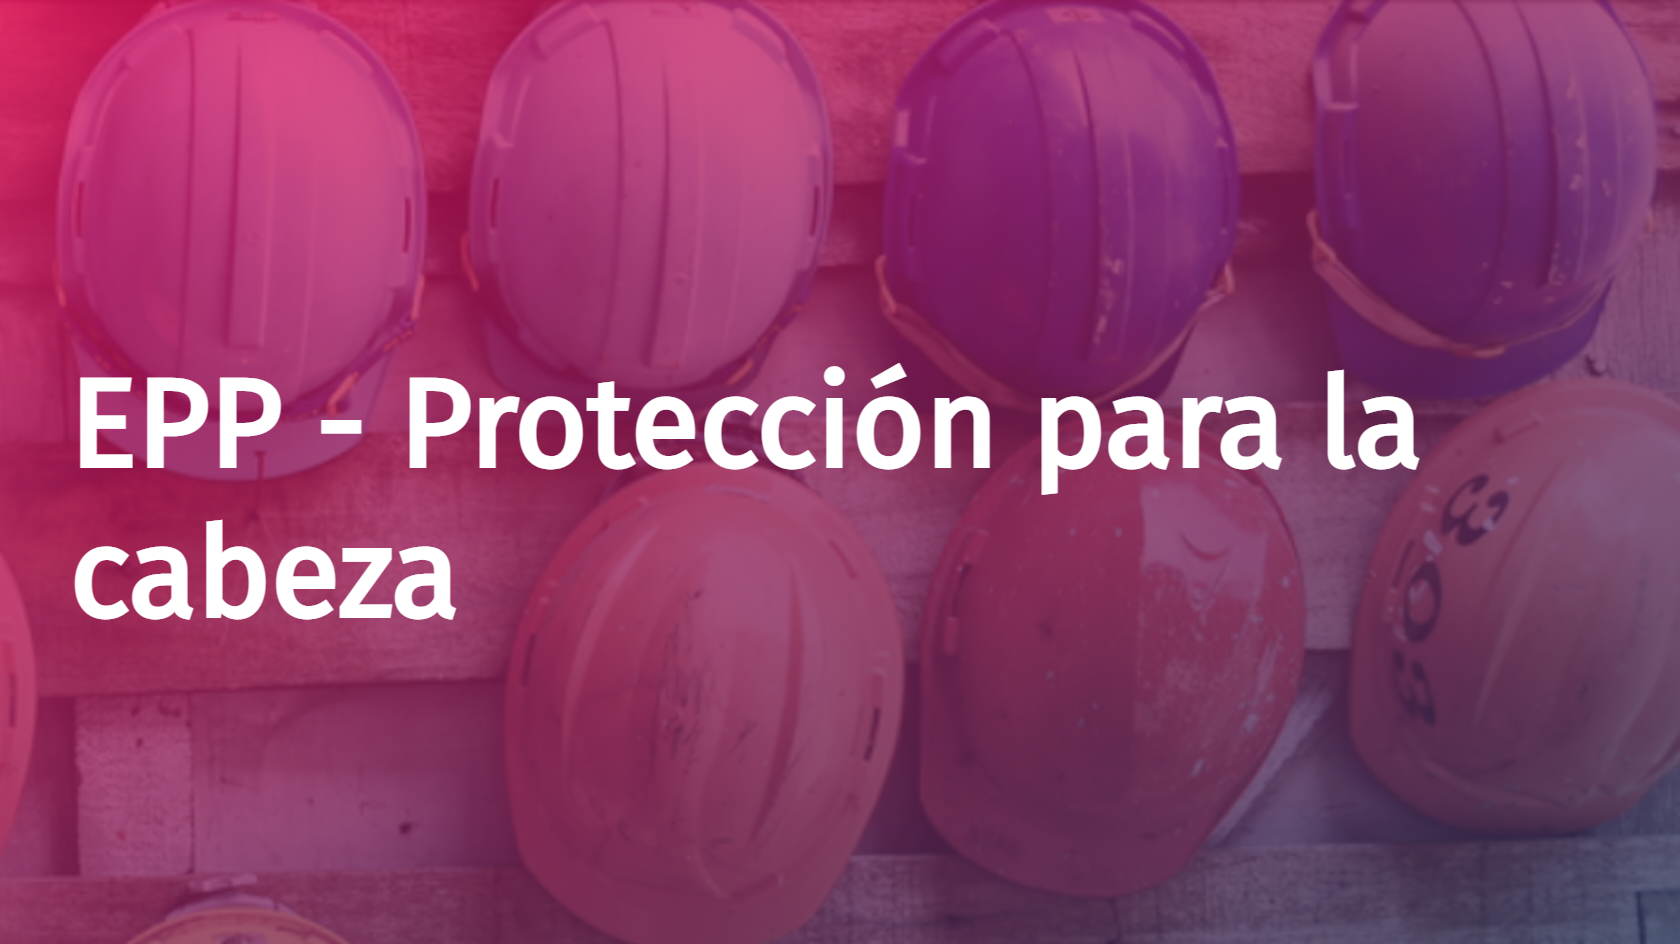 Spanish - PPE - Head Protection